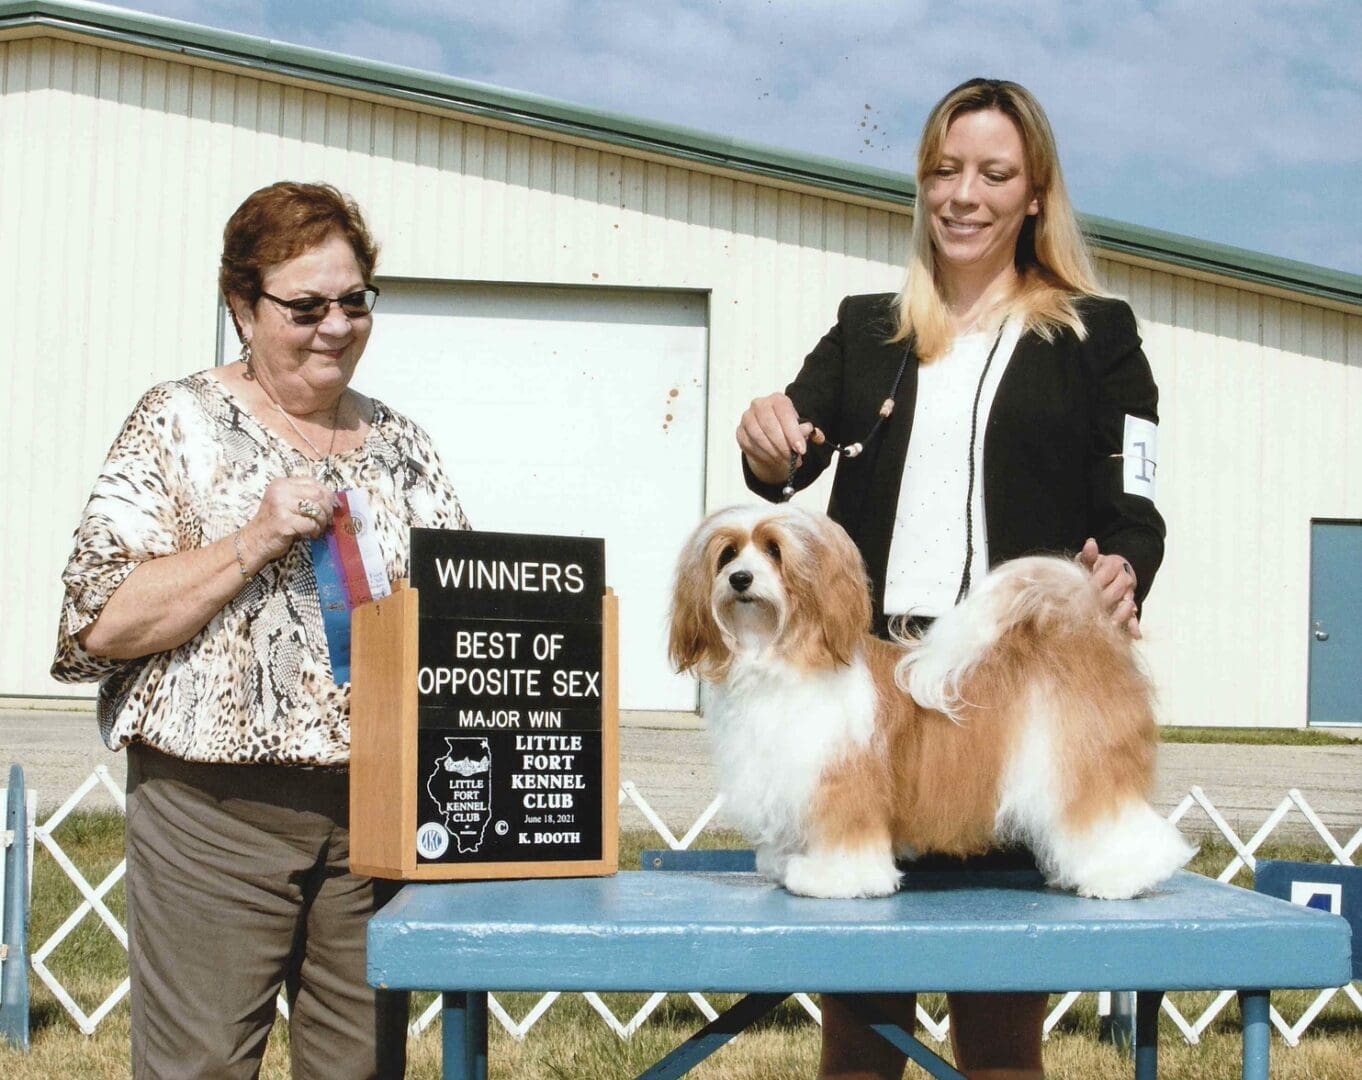 Two women standing next to a Havanese dog at a dog show.